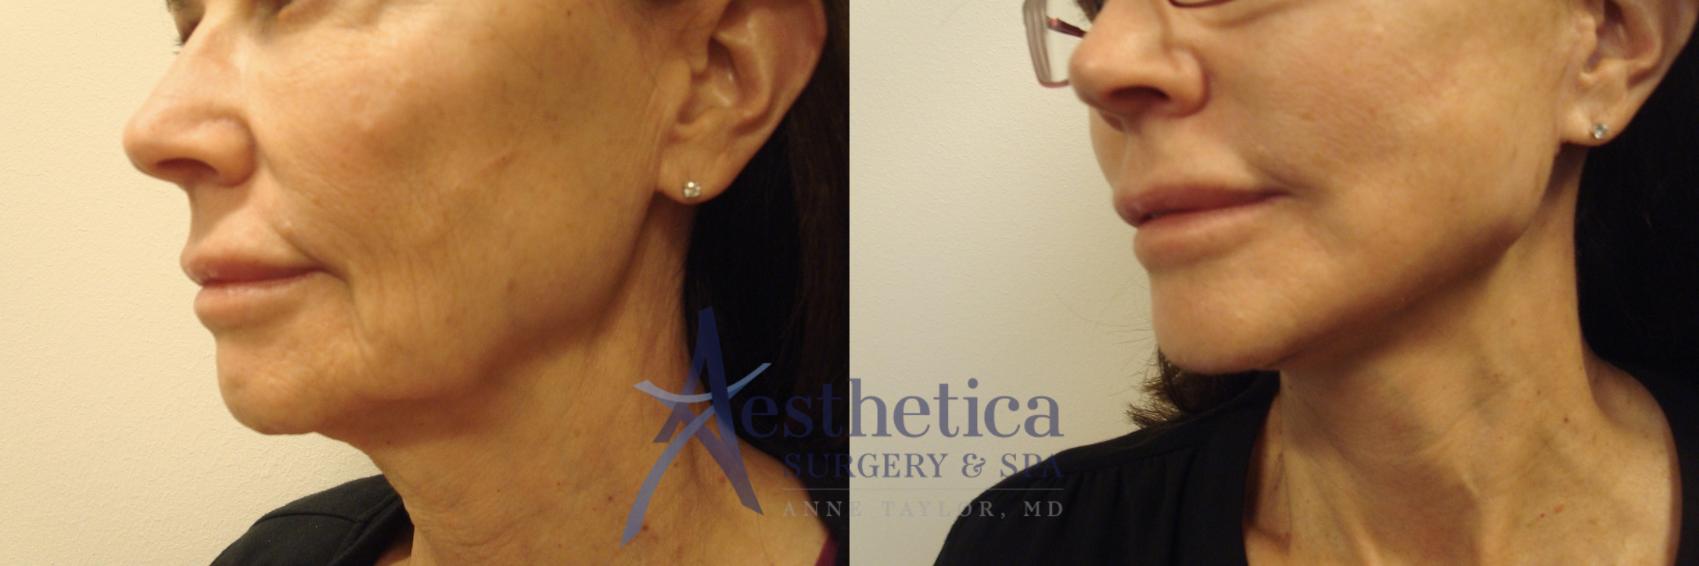 Facelift Case 736 Before & After Left Side | Columbus, OH | Aesthetica Surgery & Spa